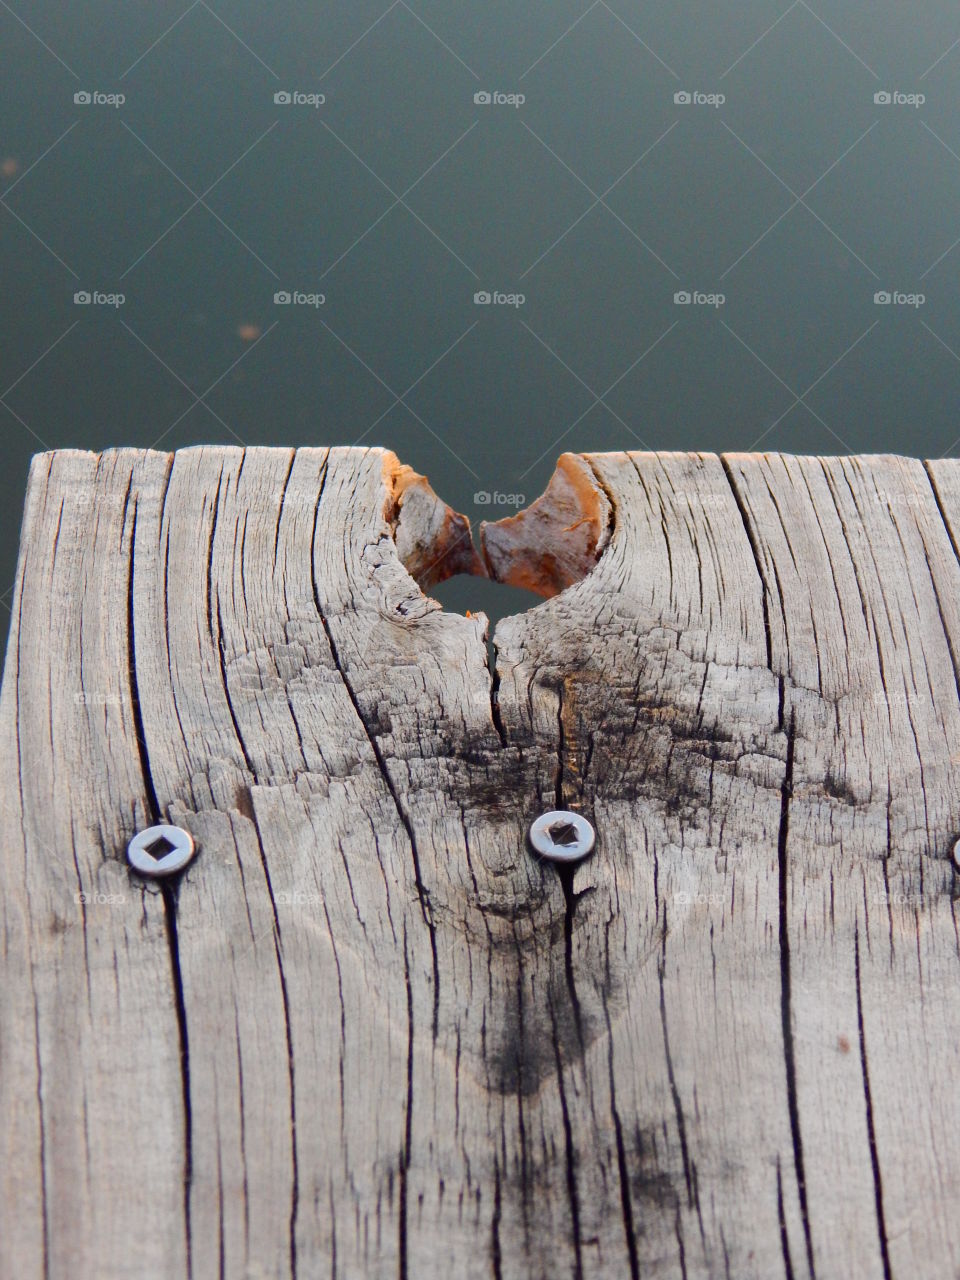 I love the details in the old weathered wood of our grandparents dock.